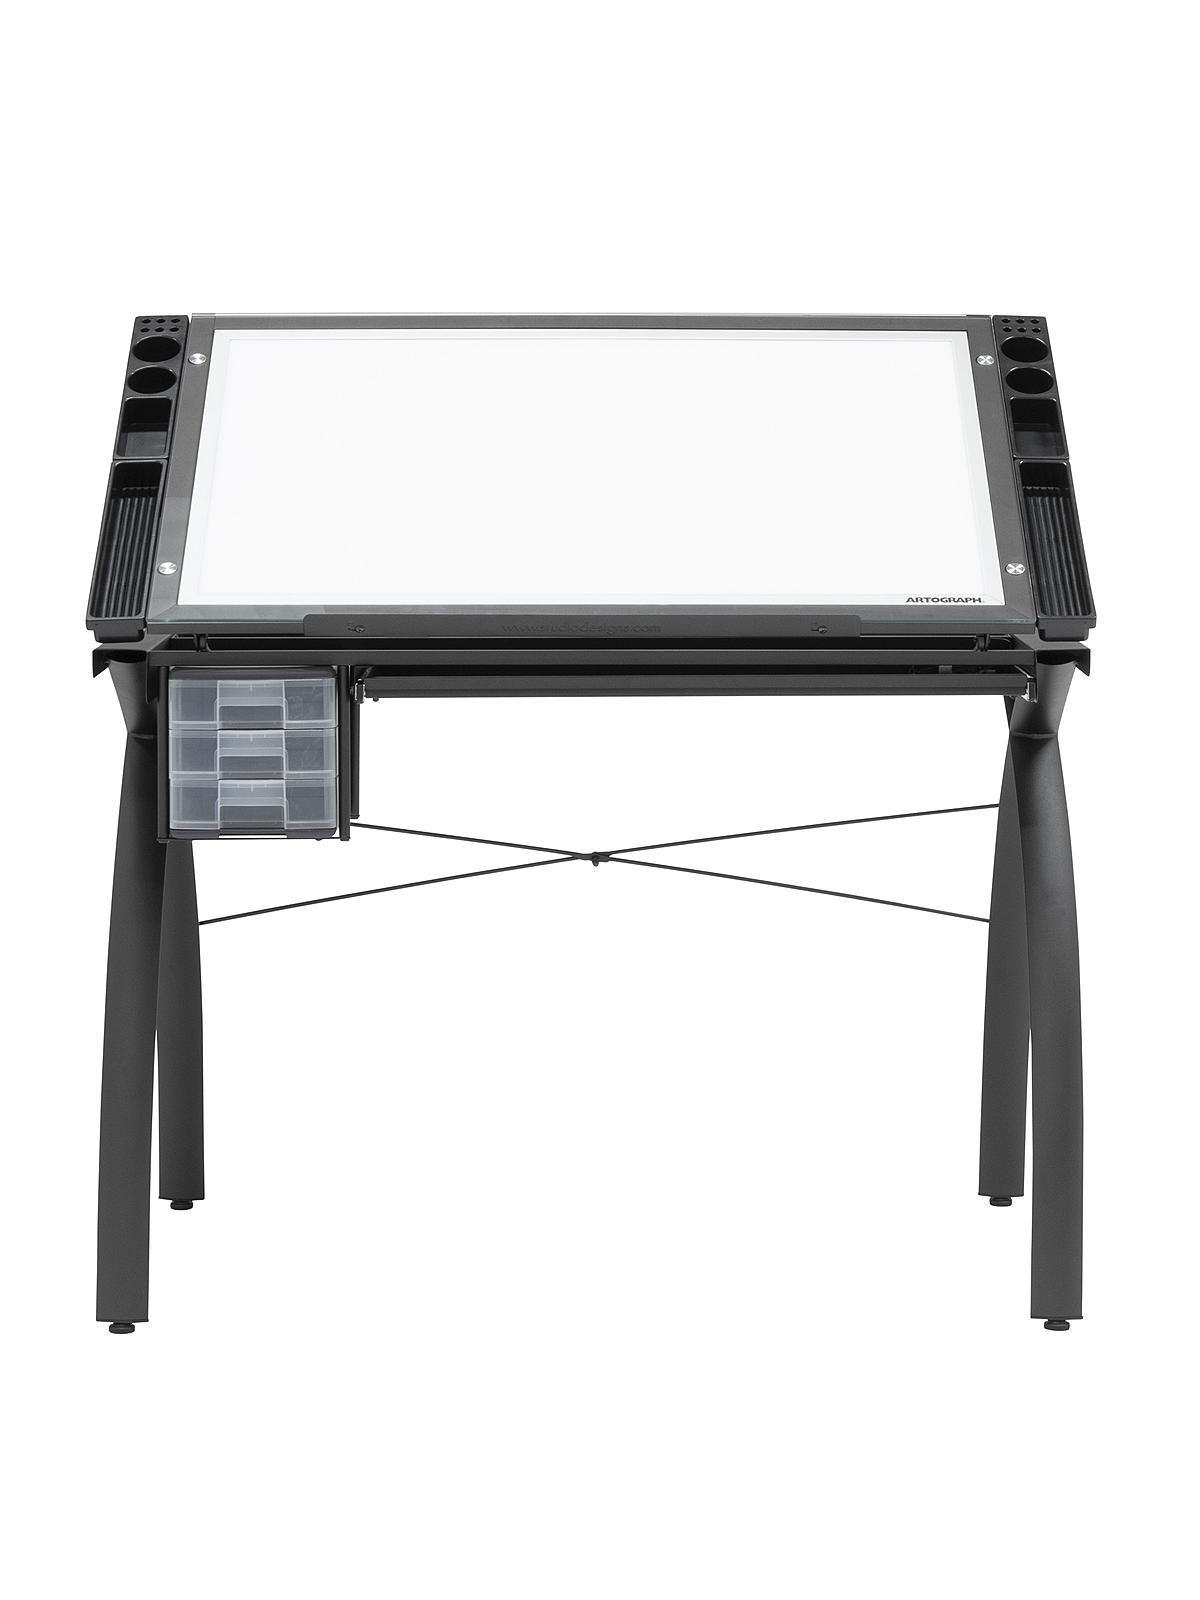 Studio Designs - Futura Light Table for Artists and Drawing - Black / Clear Glass